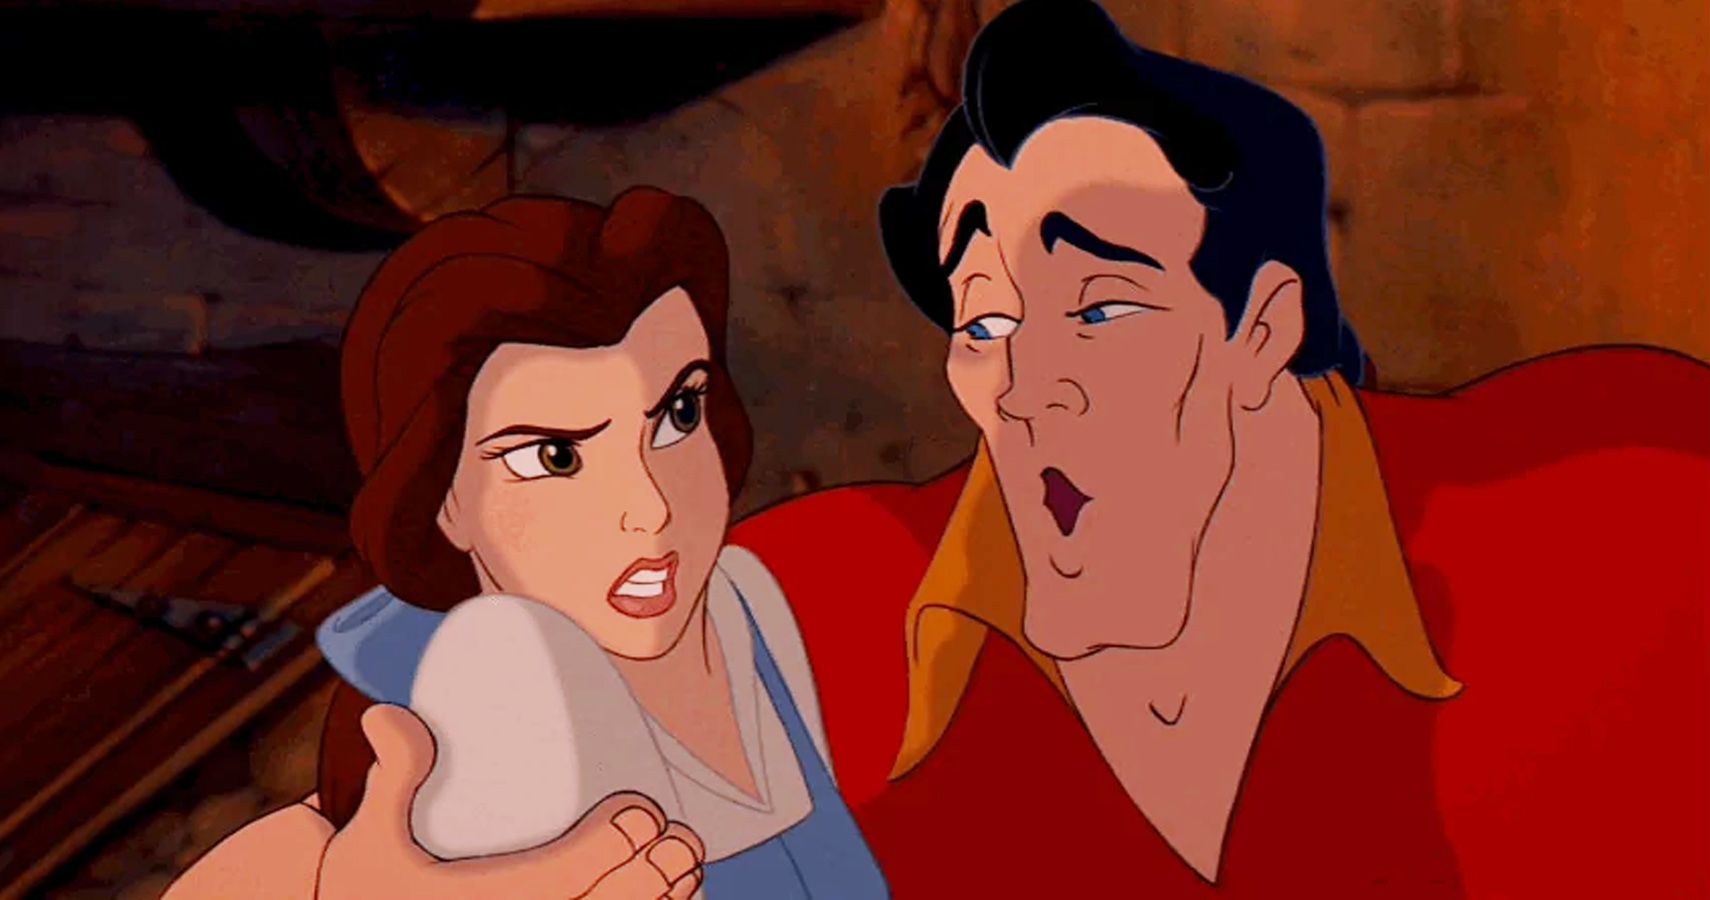 Disney: 25 Ridiculous Things About Beauty And The Beast That Make